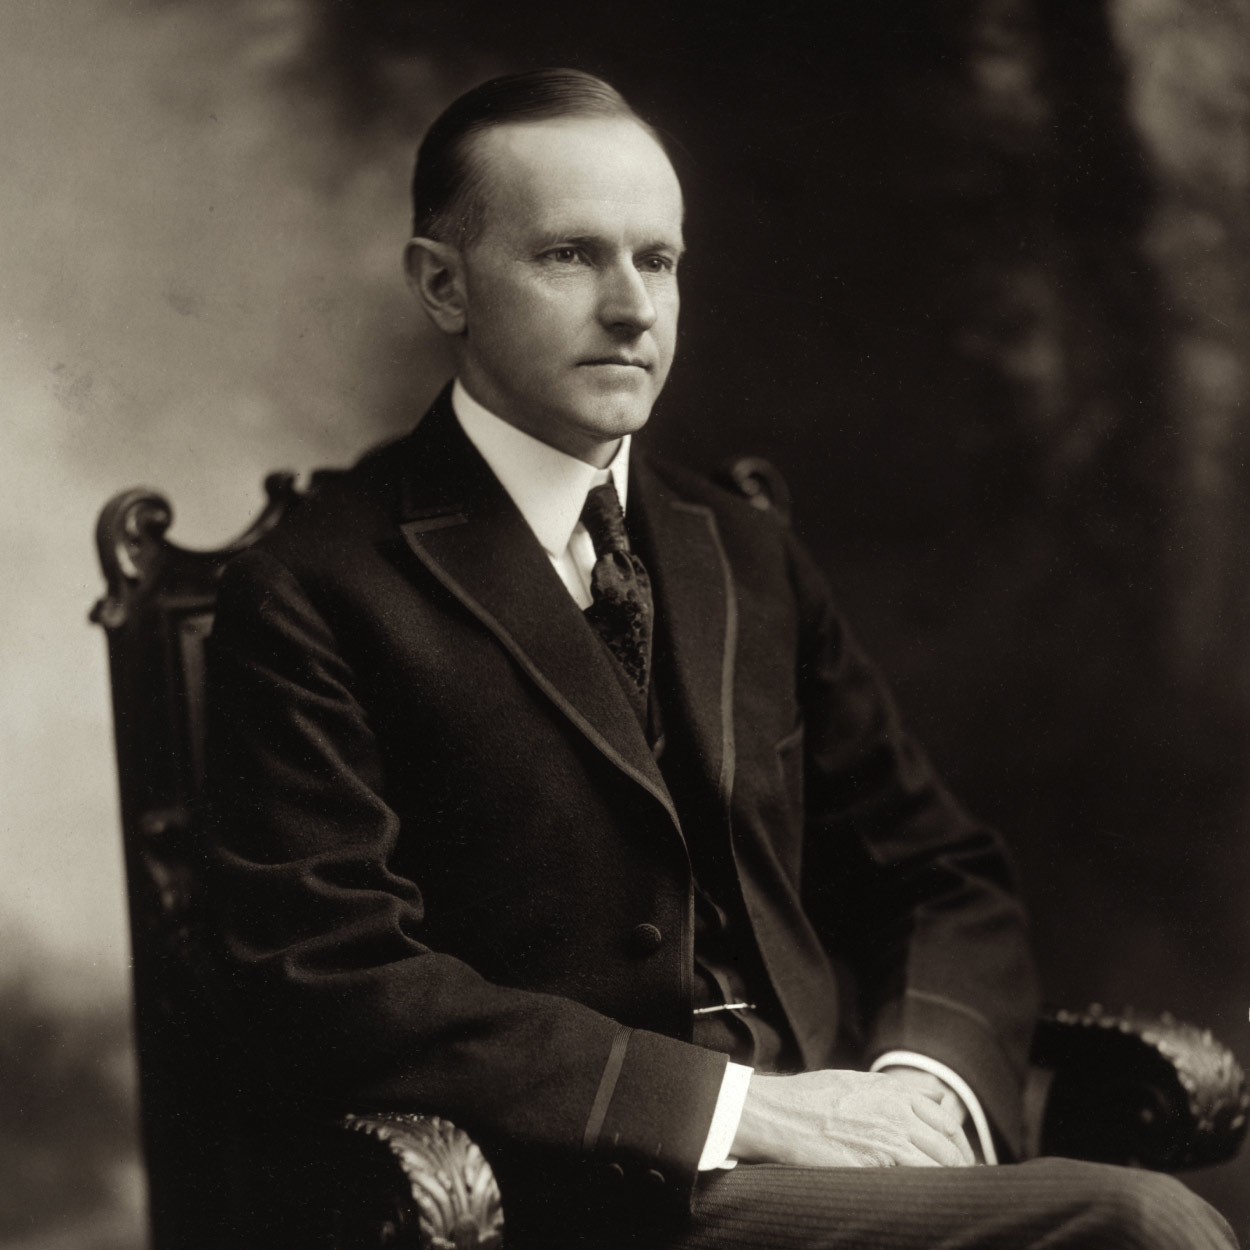 Portrait of Calvin Coolidge, the 30th President of the United States